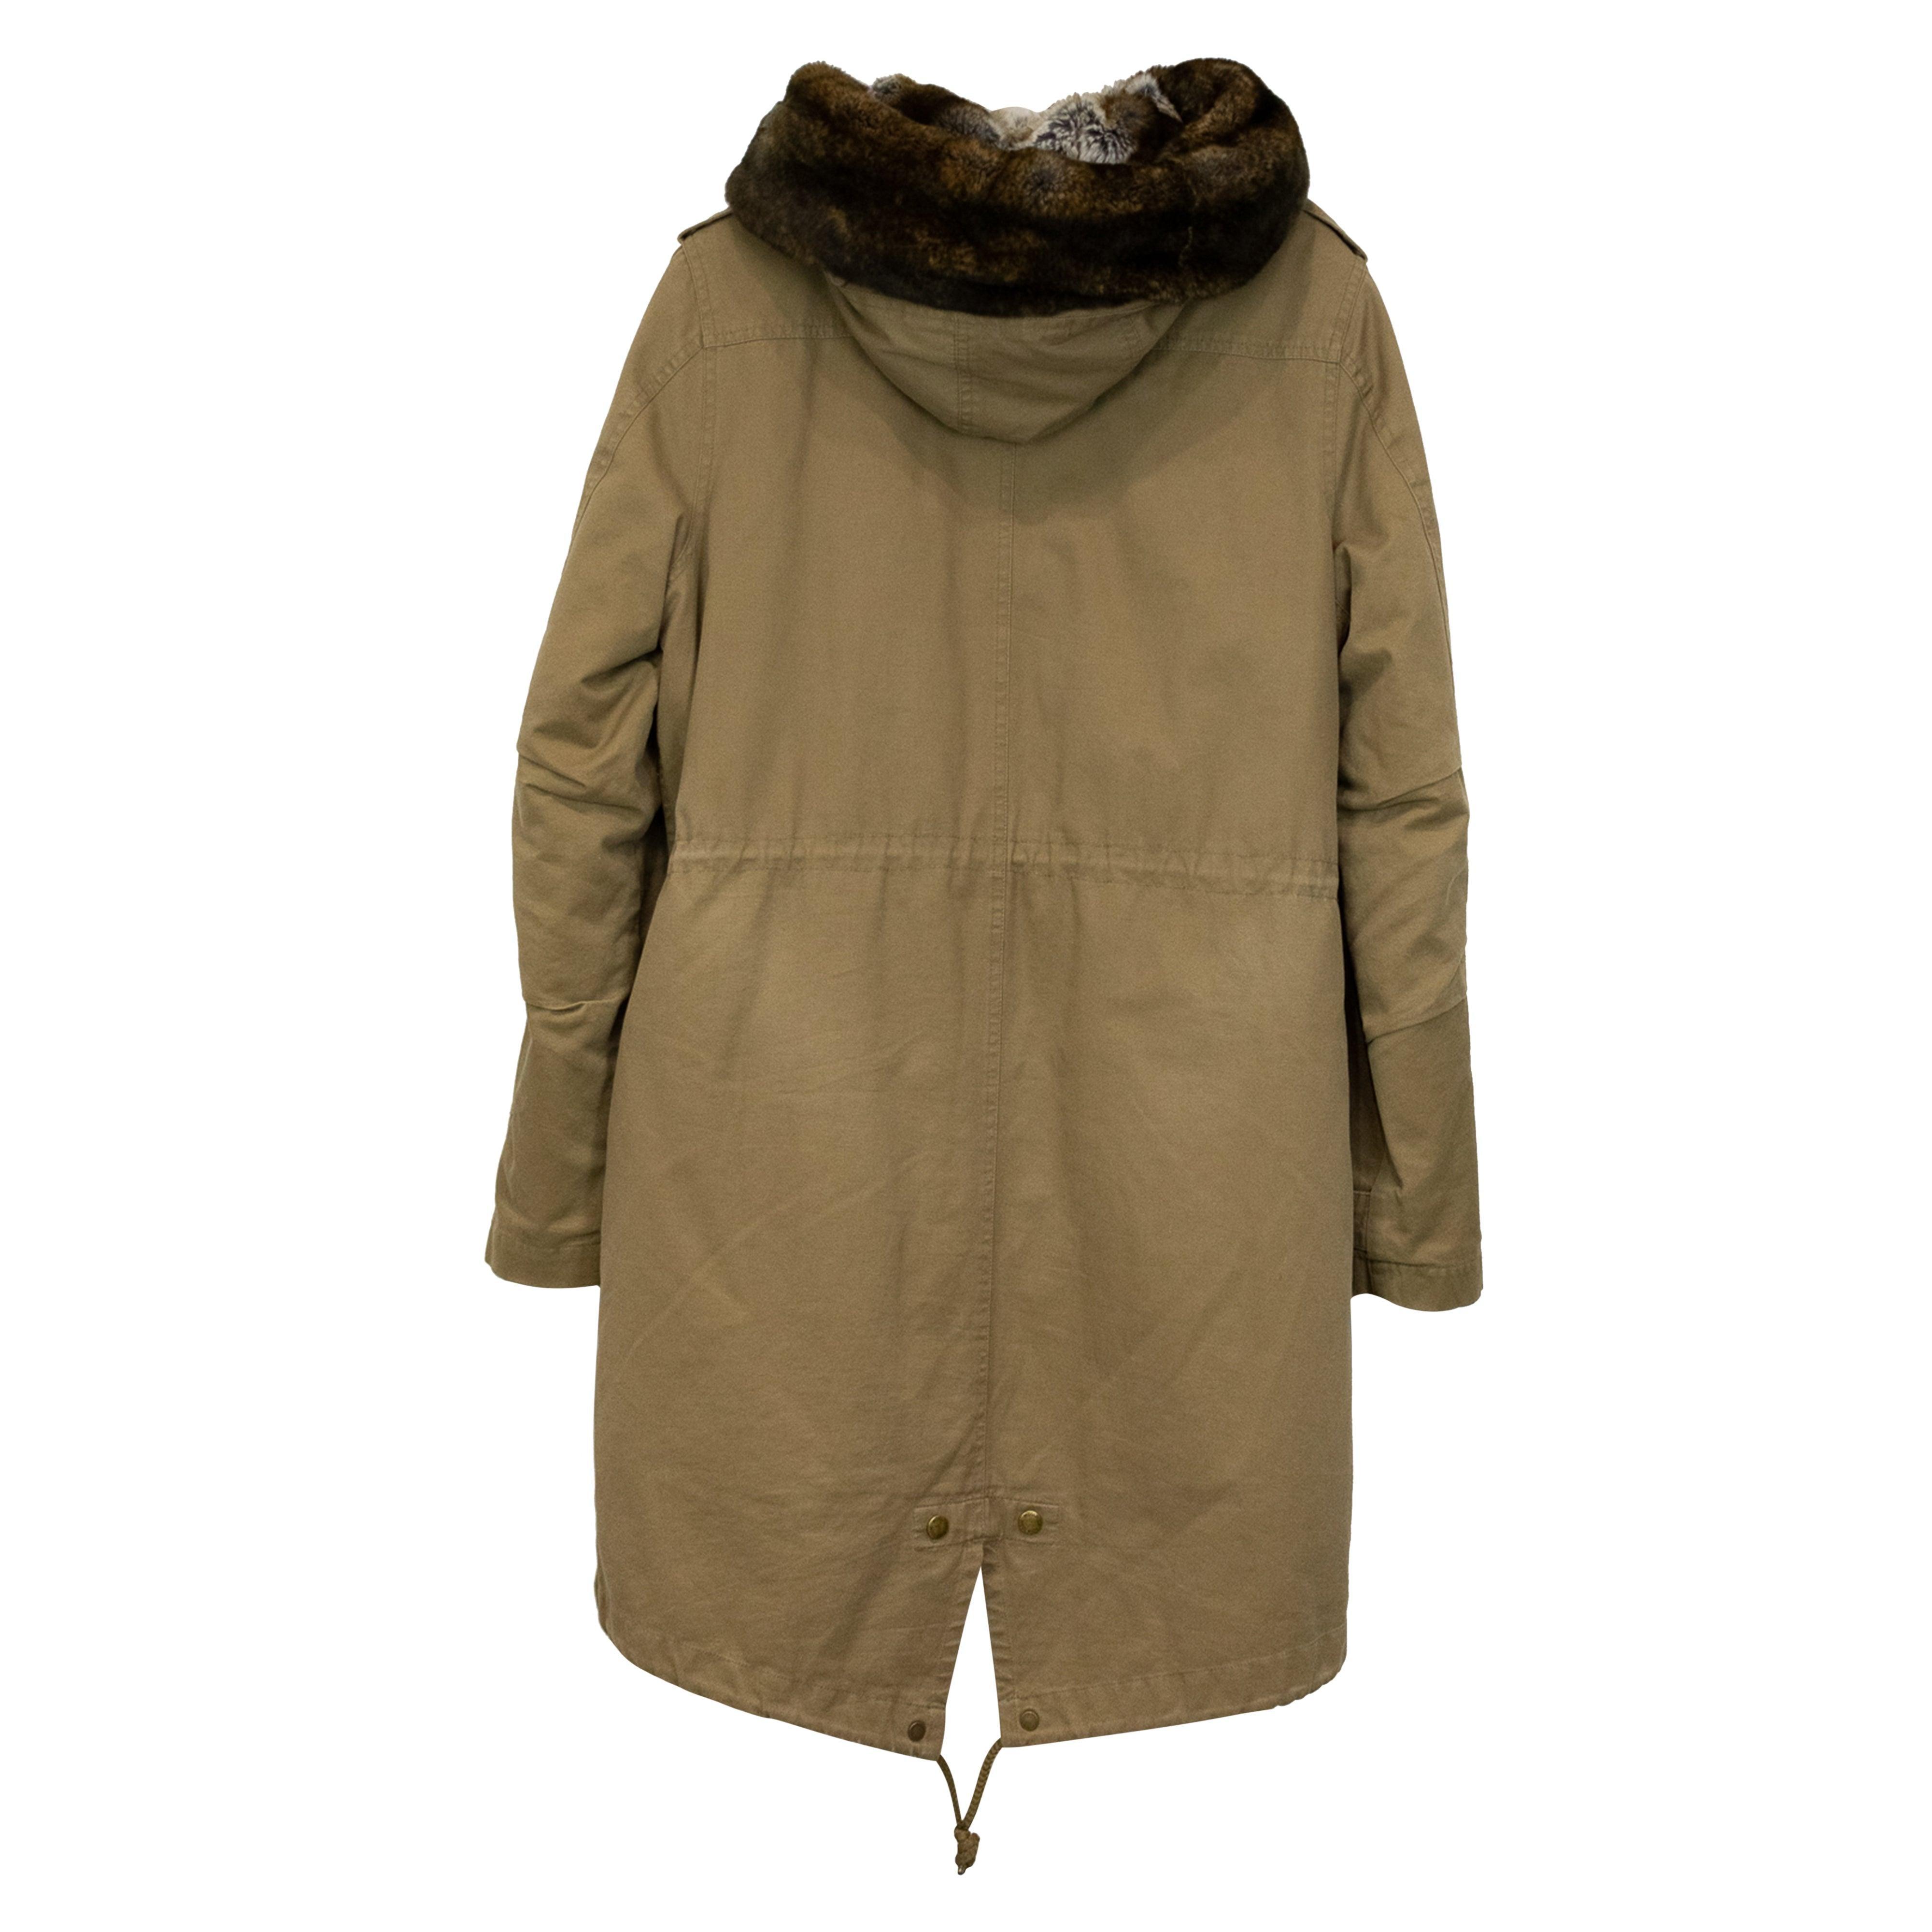 Woolrich Parka - Men's M - Fashionably Yours